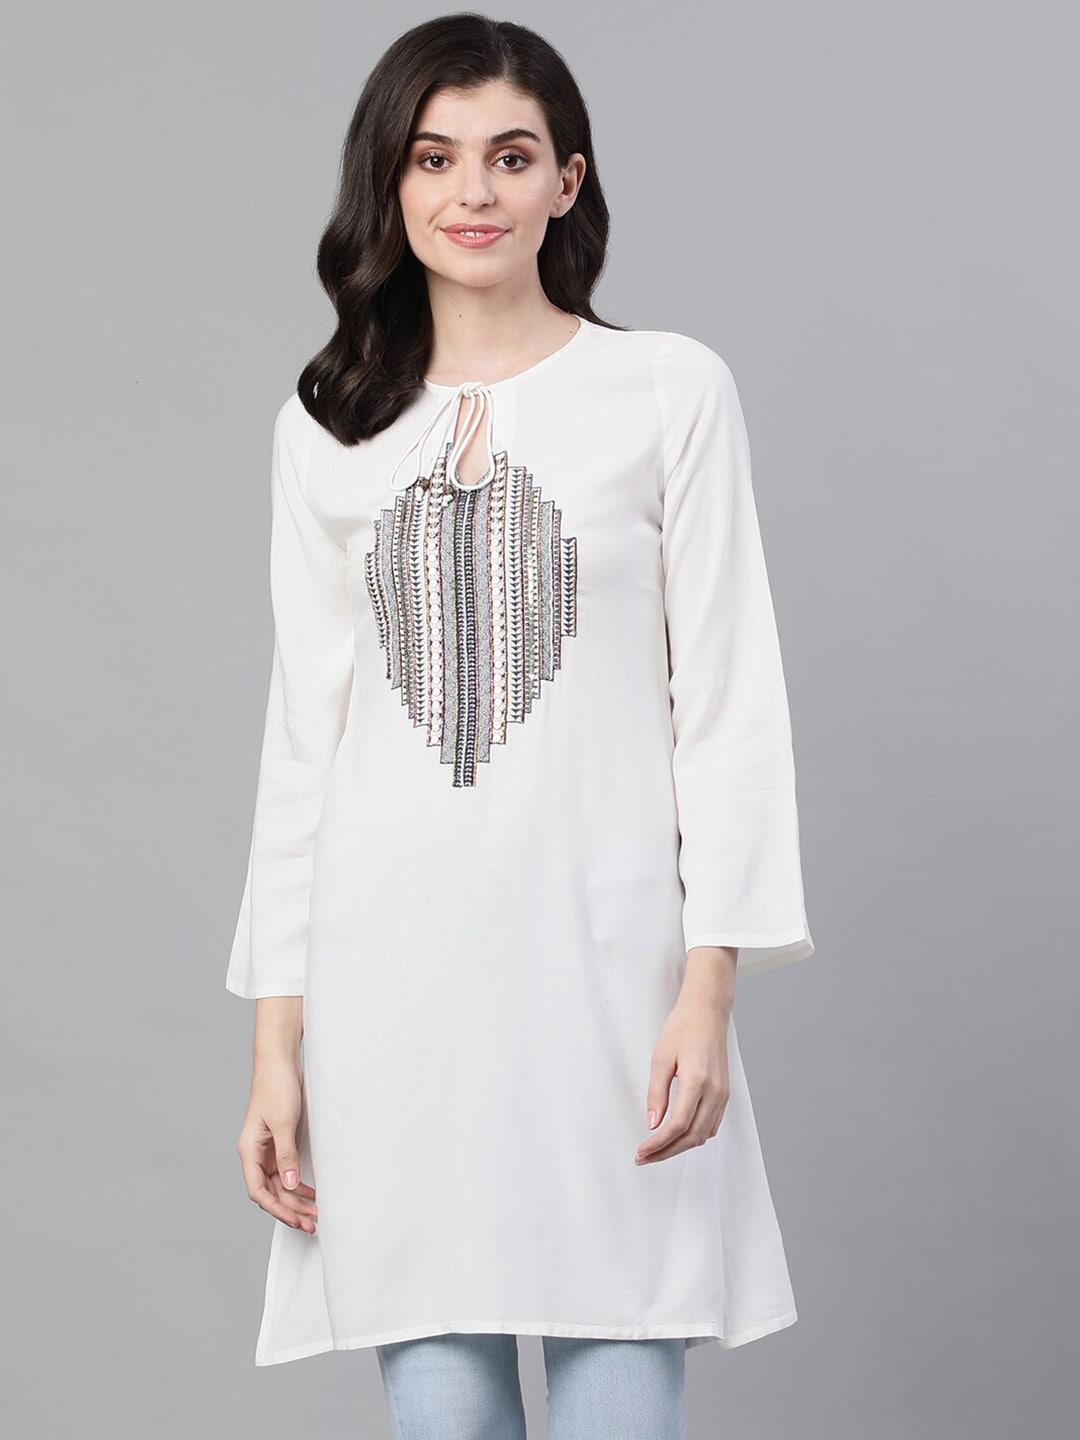 ishin-off-embroidered-beads-and-stones-tie-up-neck-kurti